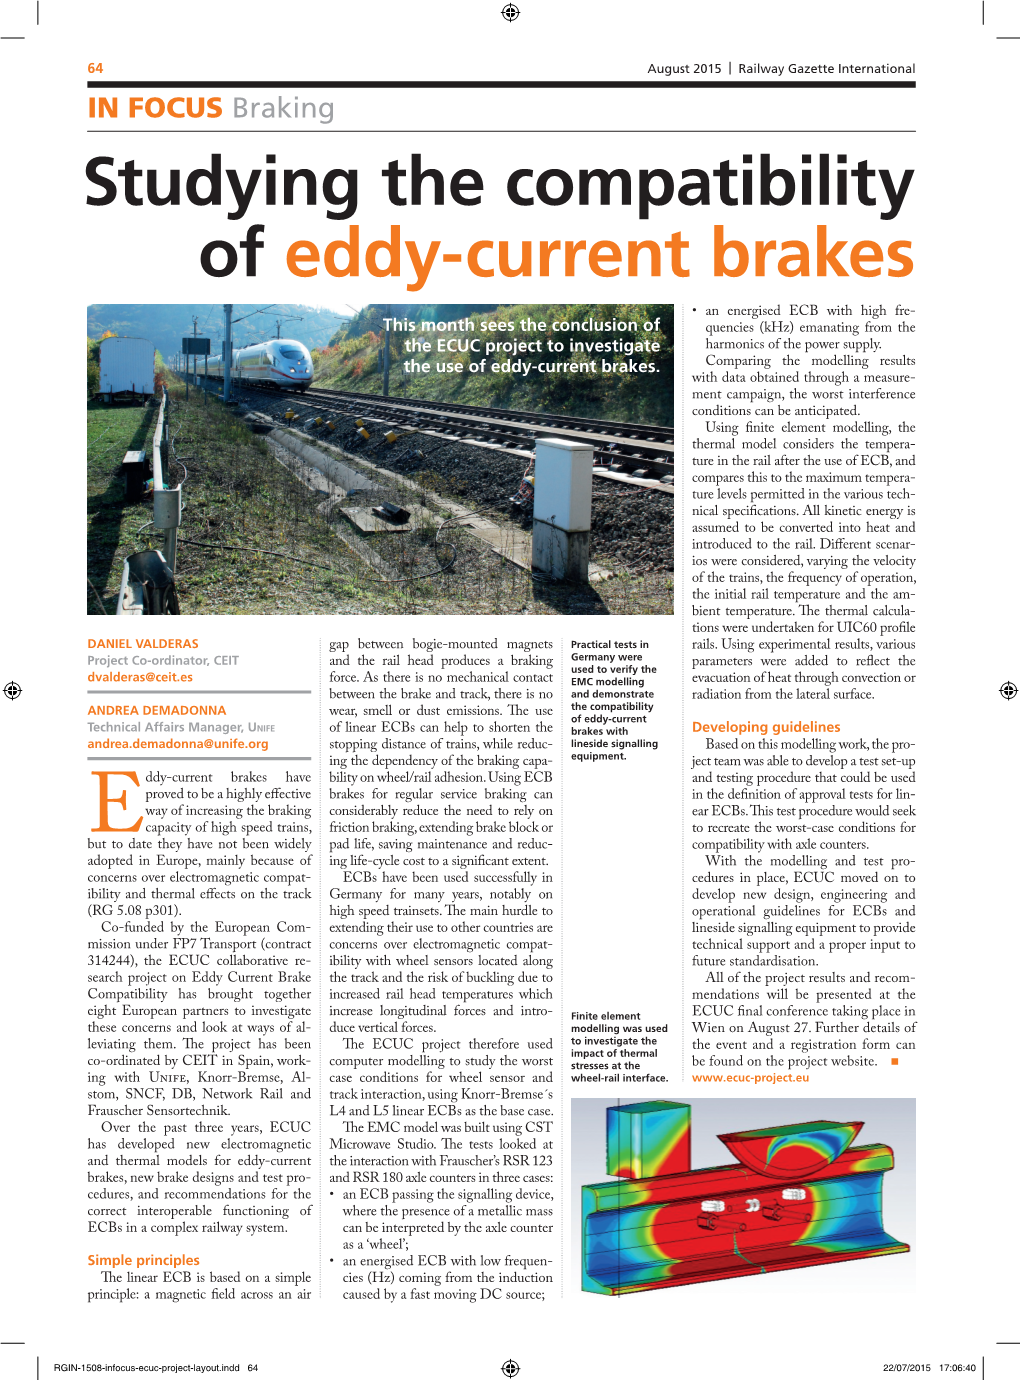 Studying the Compatibility of Eddy-Current Brakes